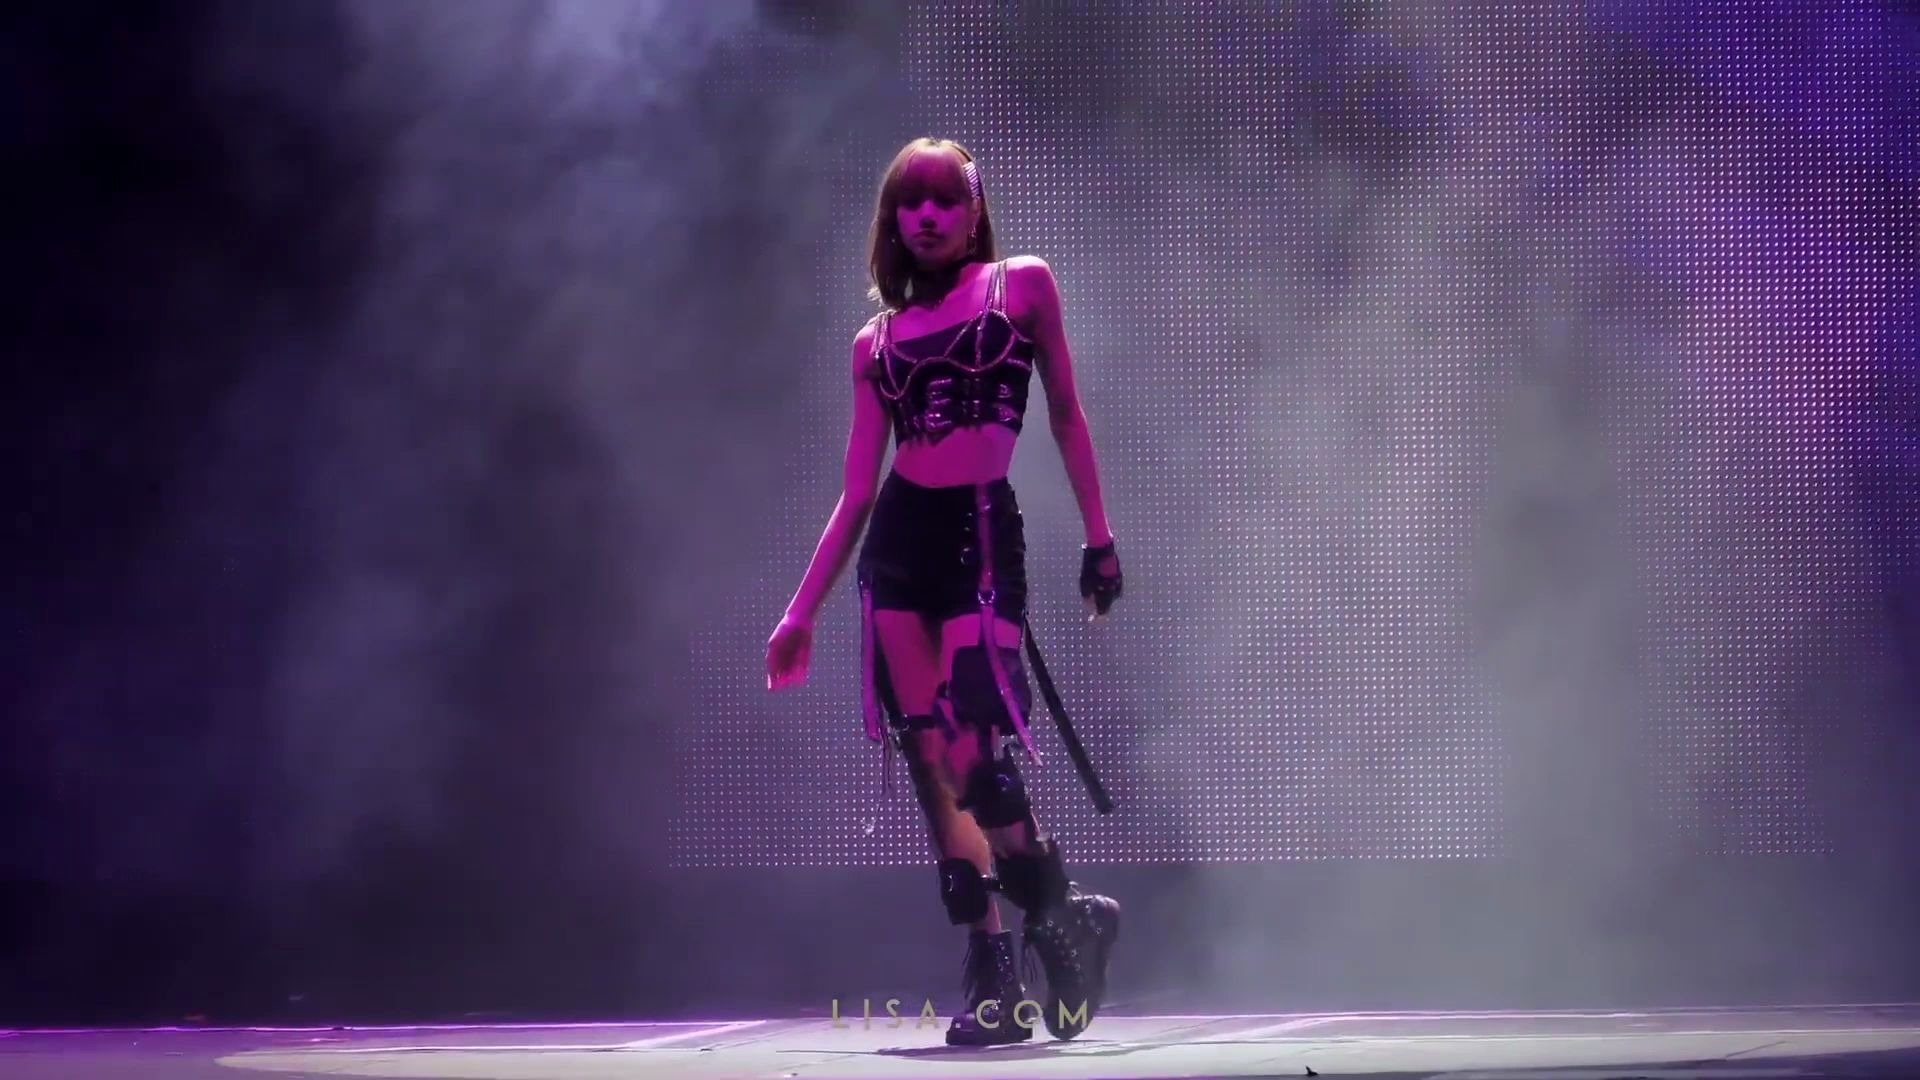 (4k) 190615 BLACKPINK LISA Solo Stage (Take me   Swalla) - 2019 WORLD TOUR in SY